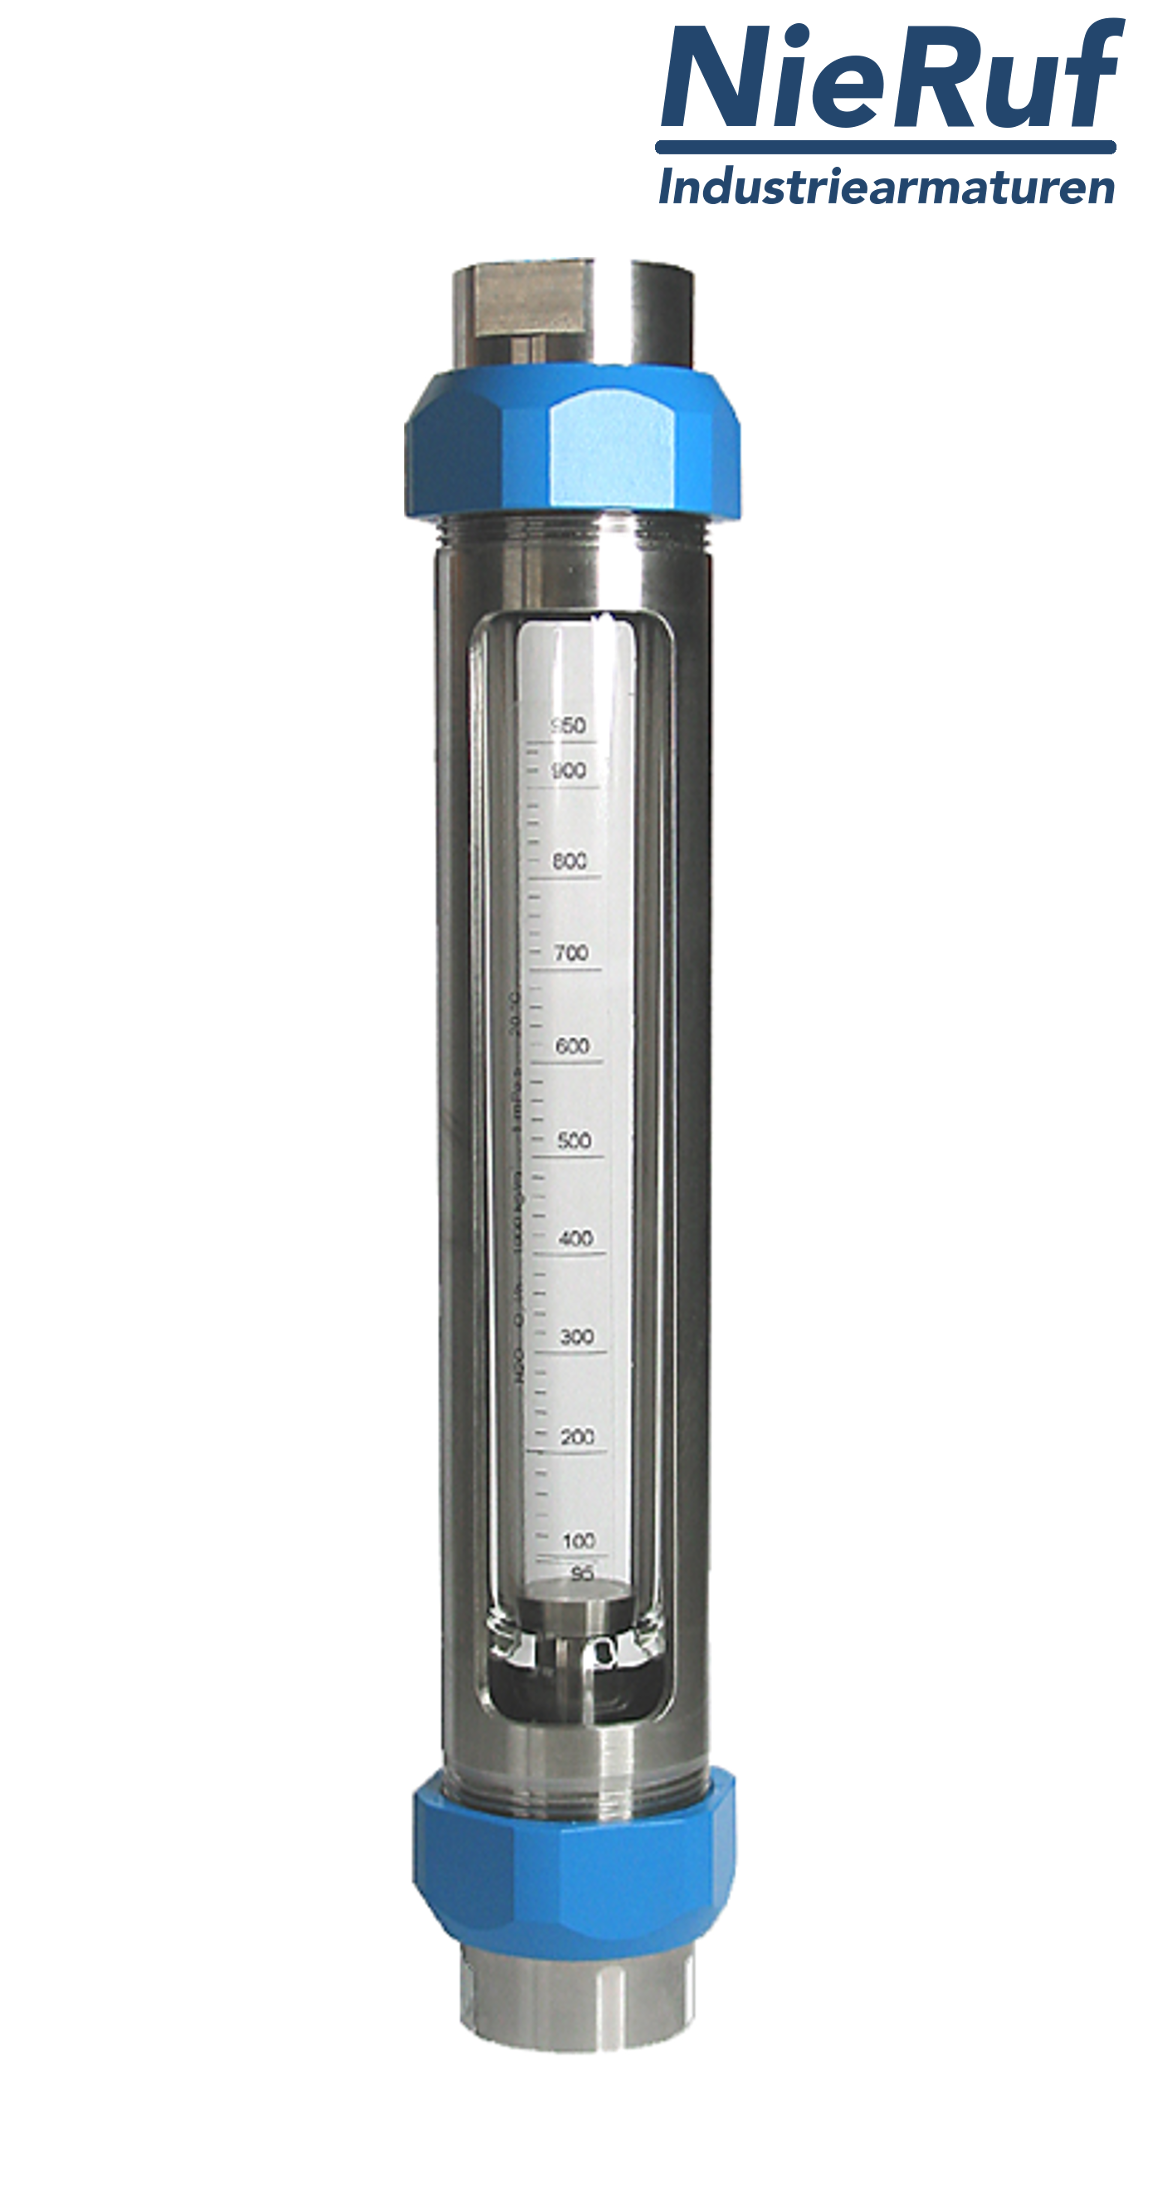 Variable area flowmeter stainless steel + borosilicate 2" inch 650.0 - 6500 l/h water FKM